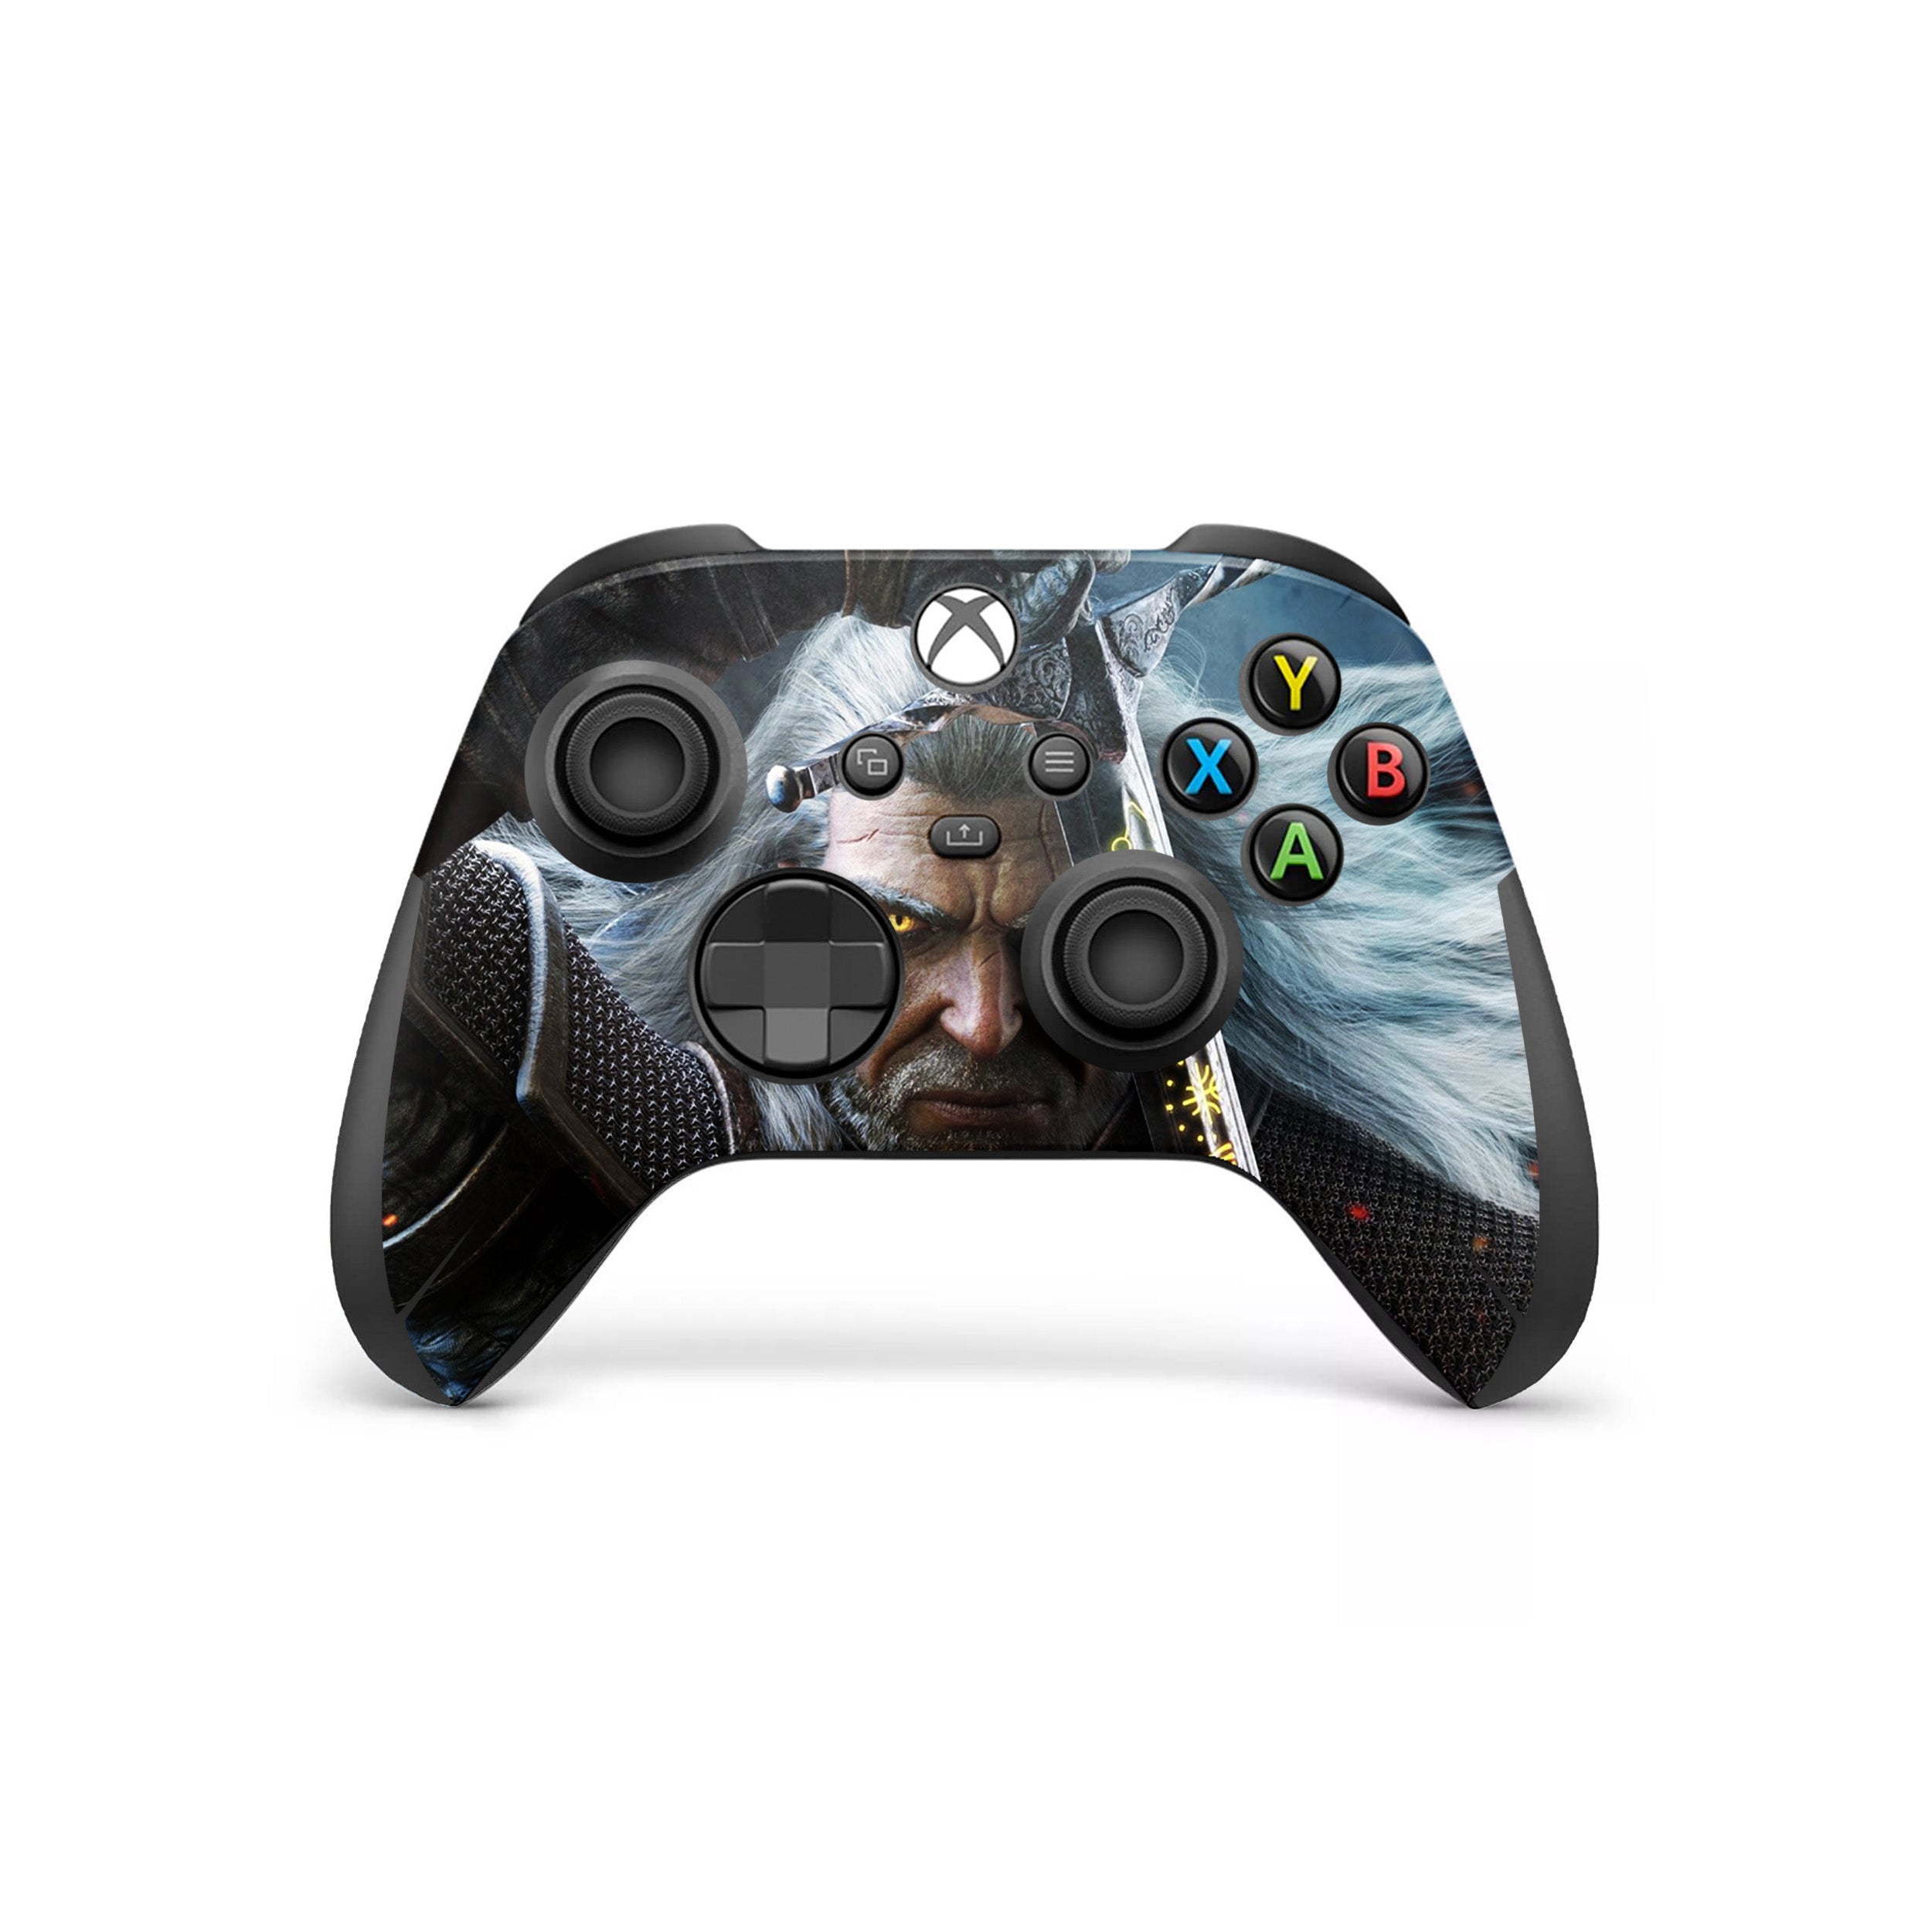 A video game skin featuring a The Witcher 3 design for the Xbox Wireless Controller.